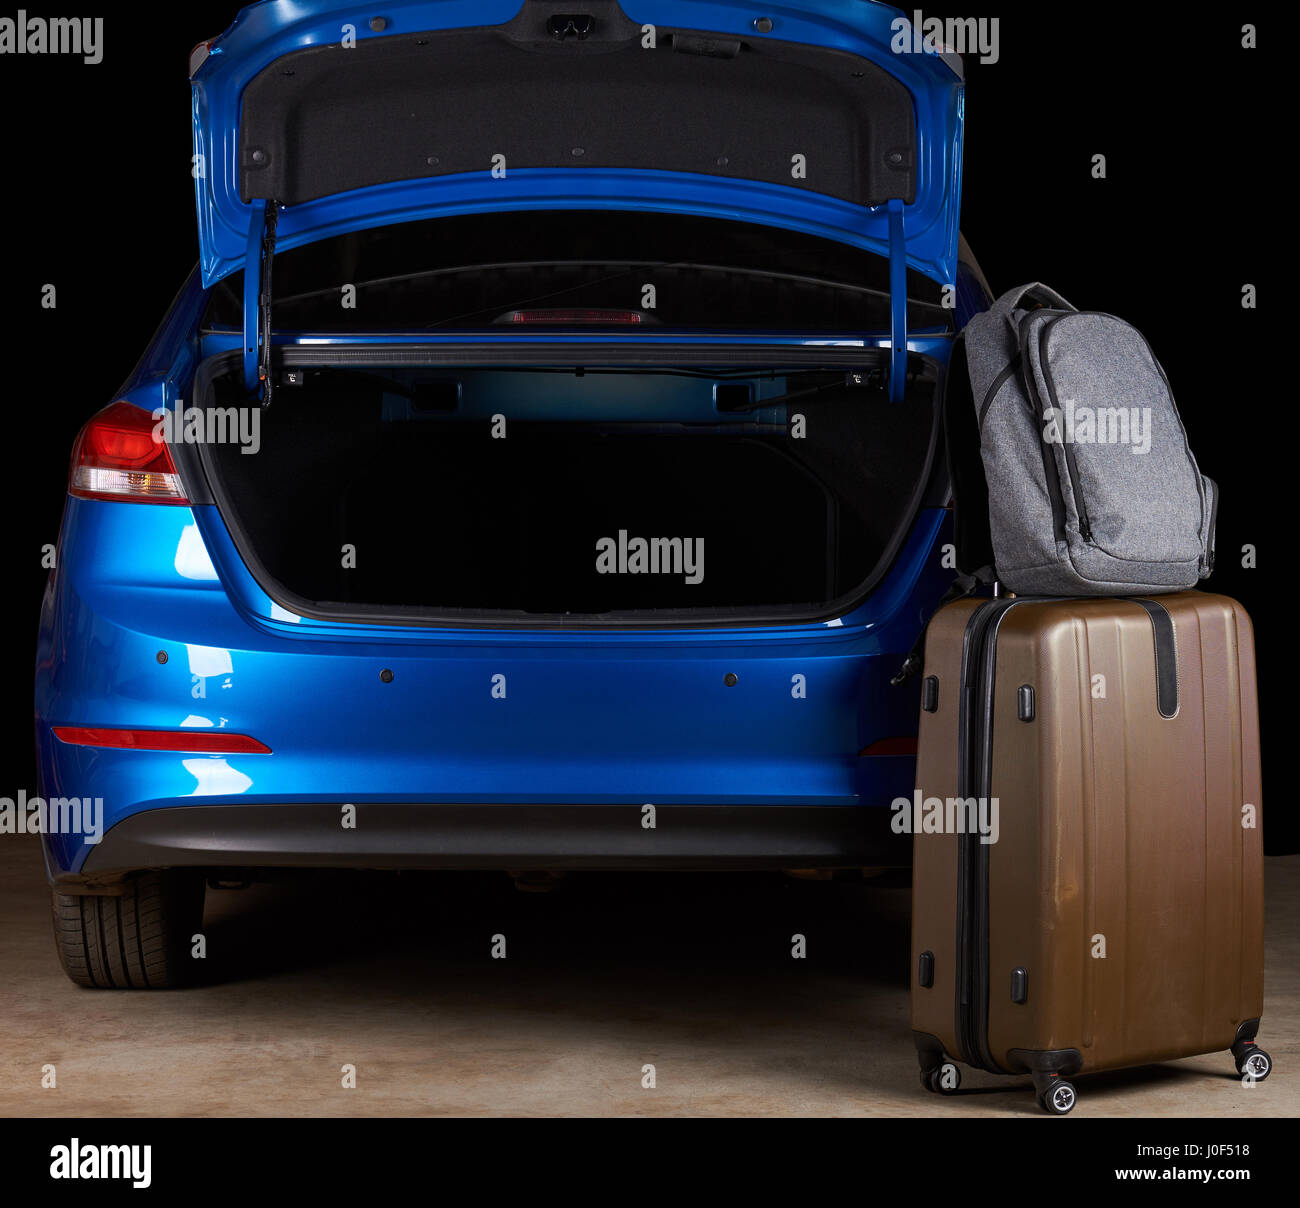 Luggage bags stand next to open car empty trunk isolated on black background Stock Photo